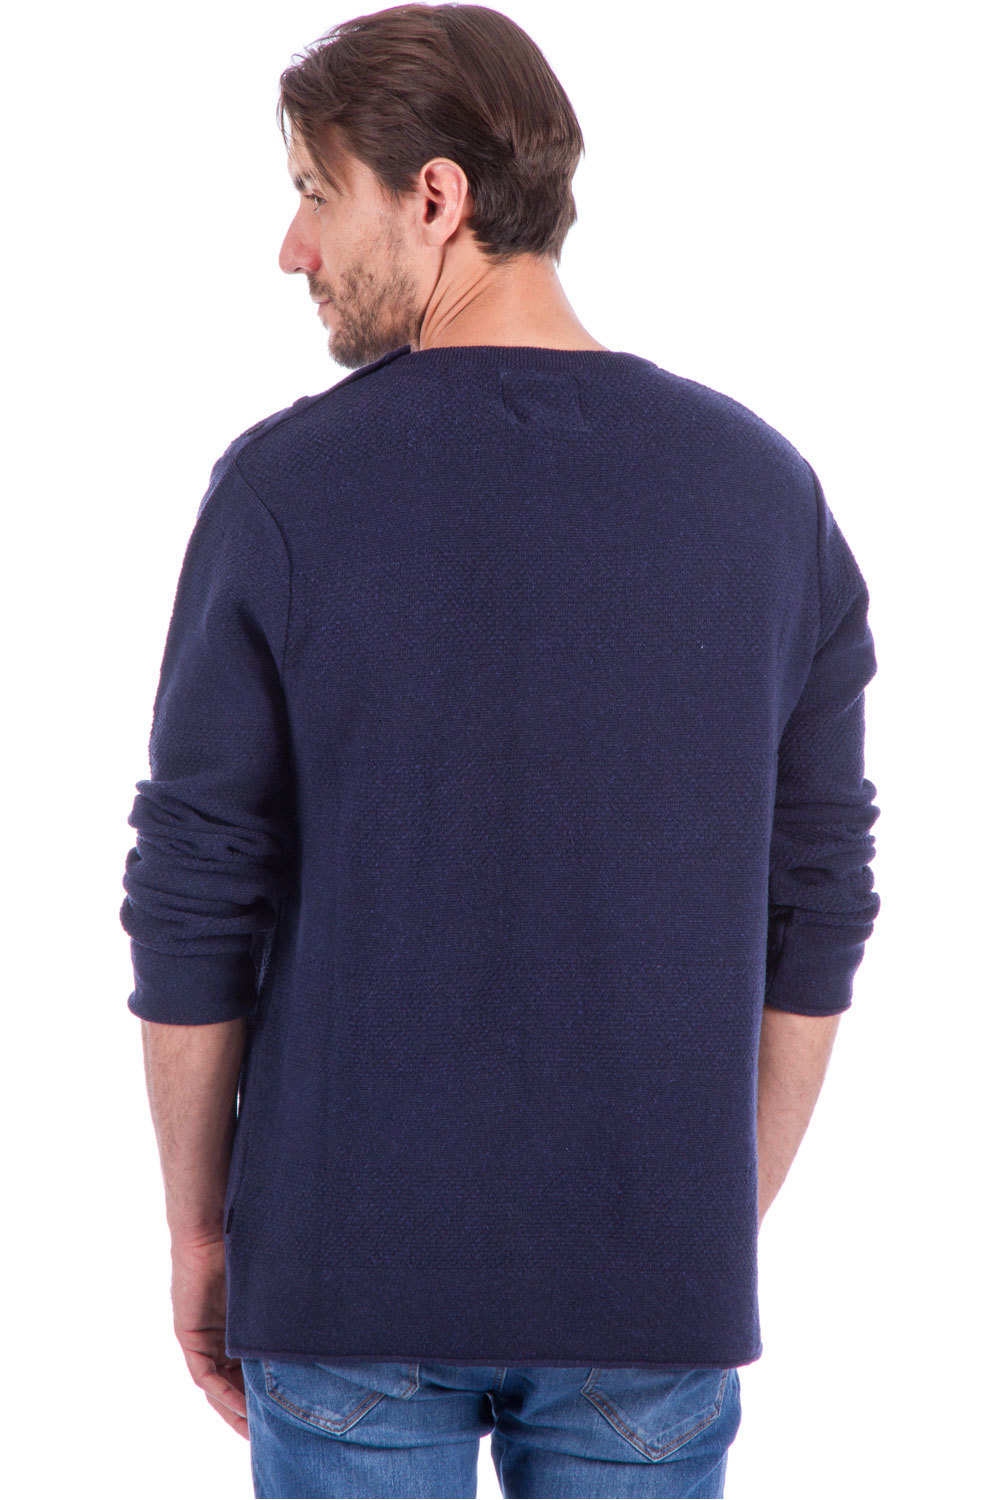 Rip Curl jersey hombre FIFTY SWEATER vista trasera